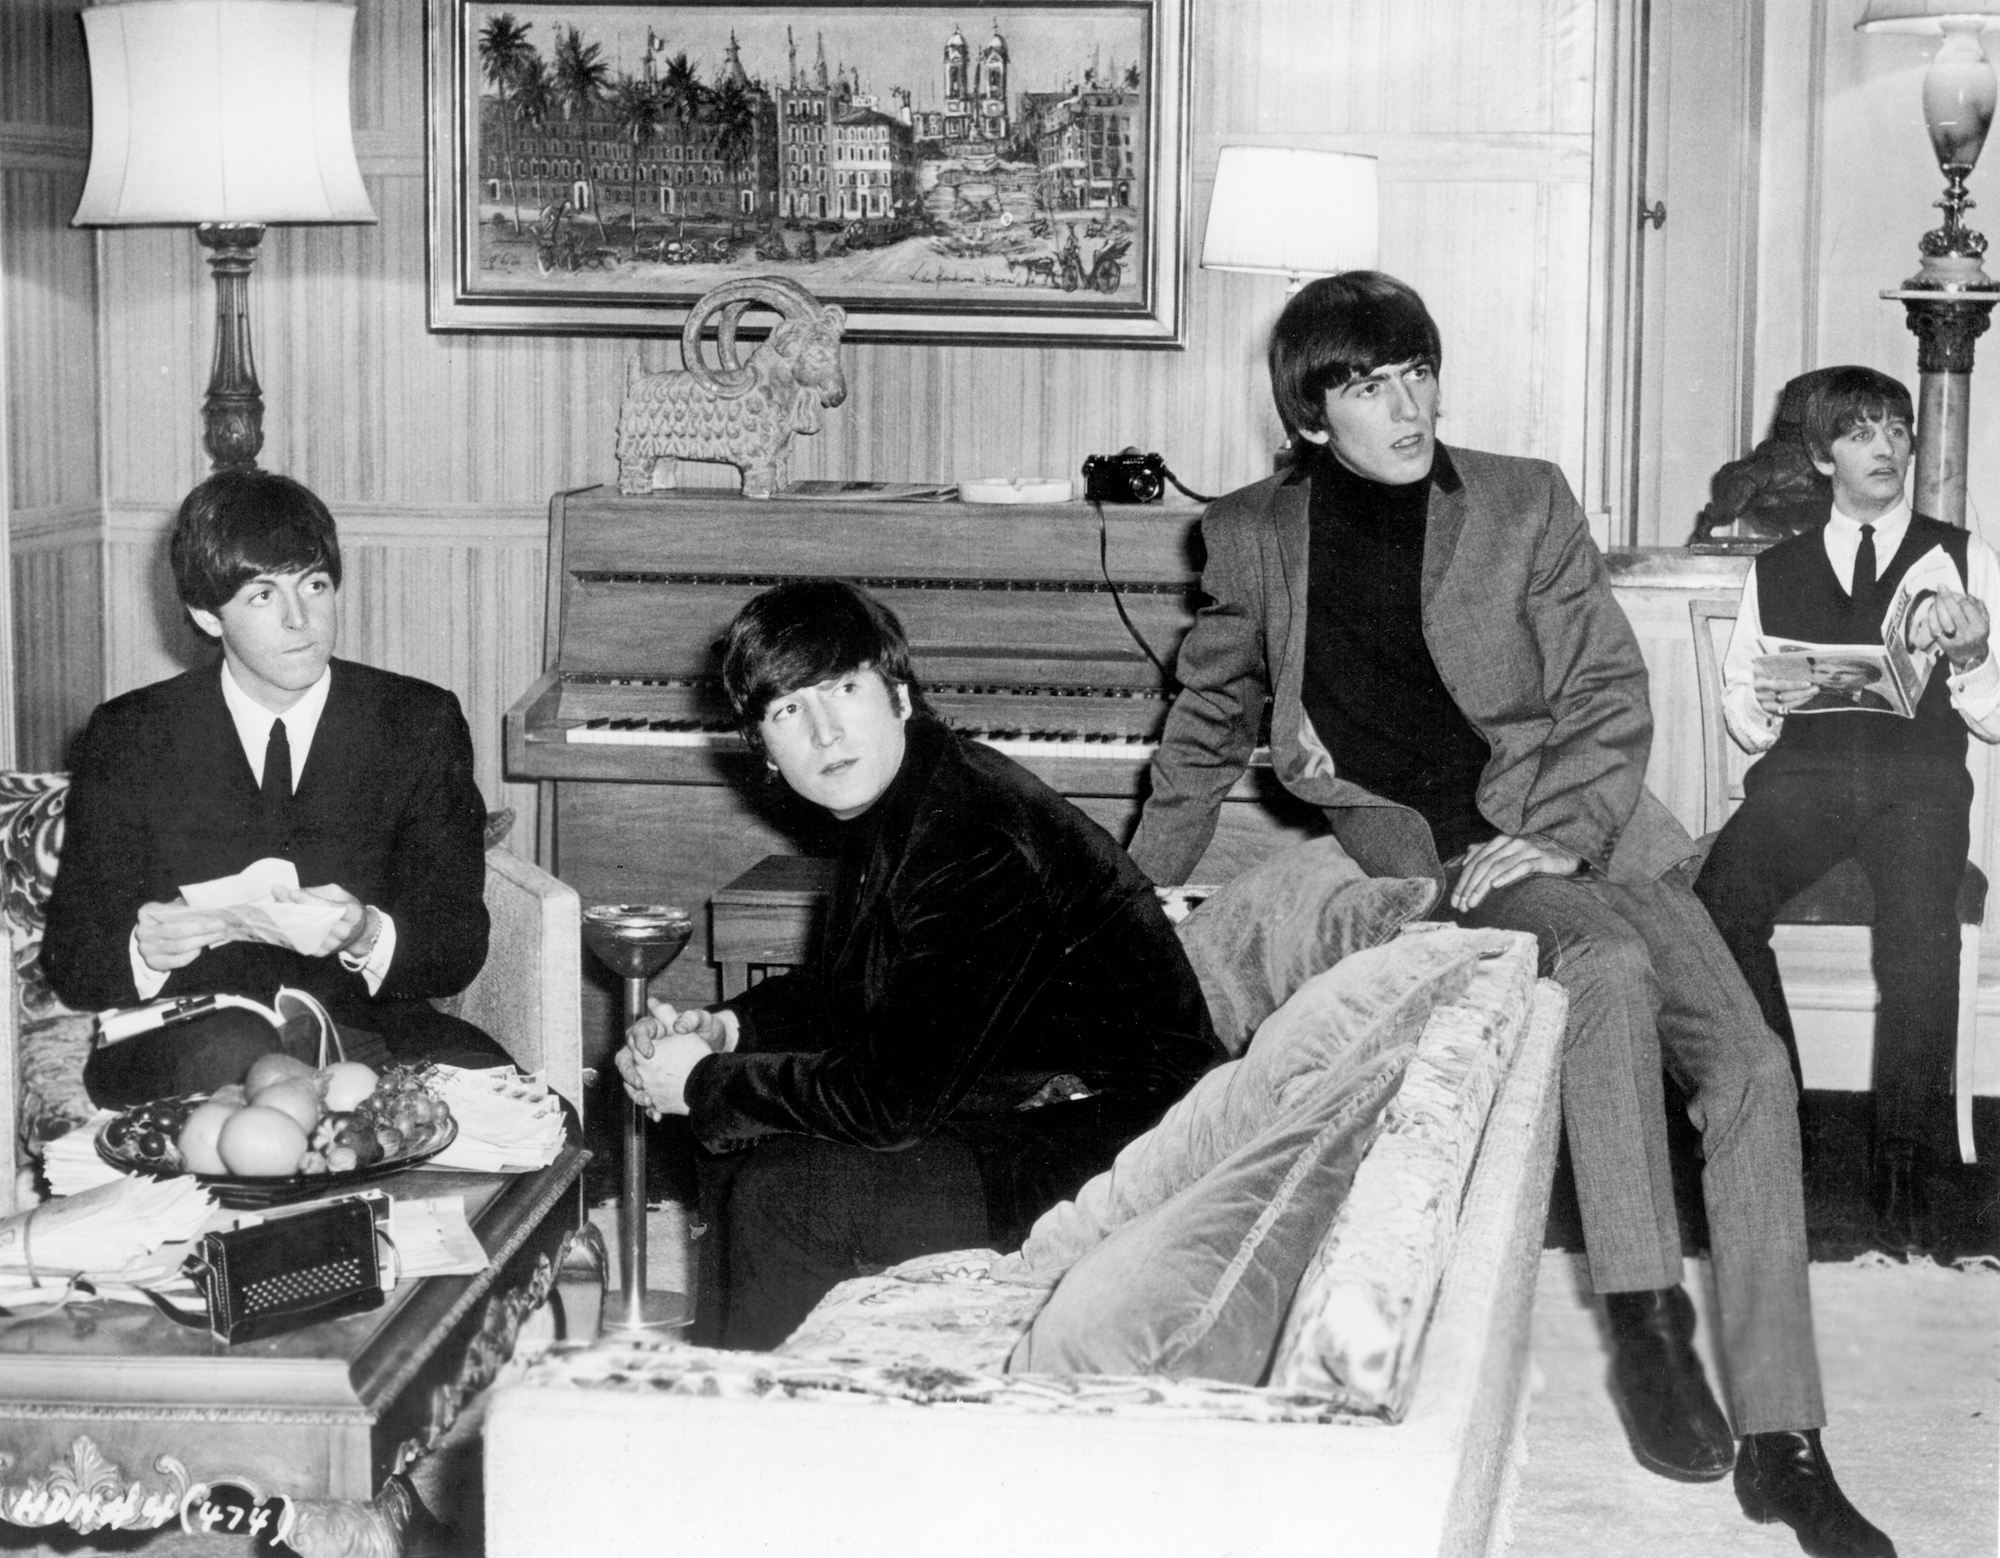 The Beatles star in their movie A Hard Day's Night